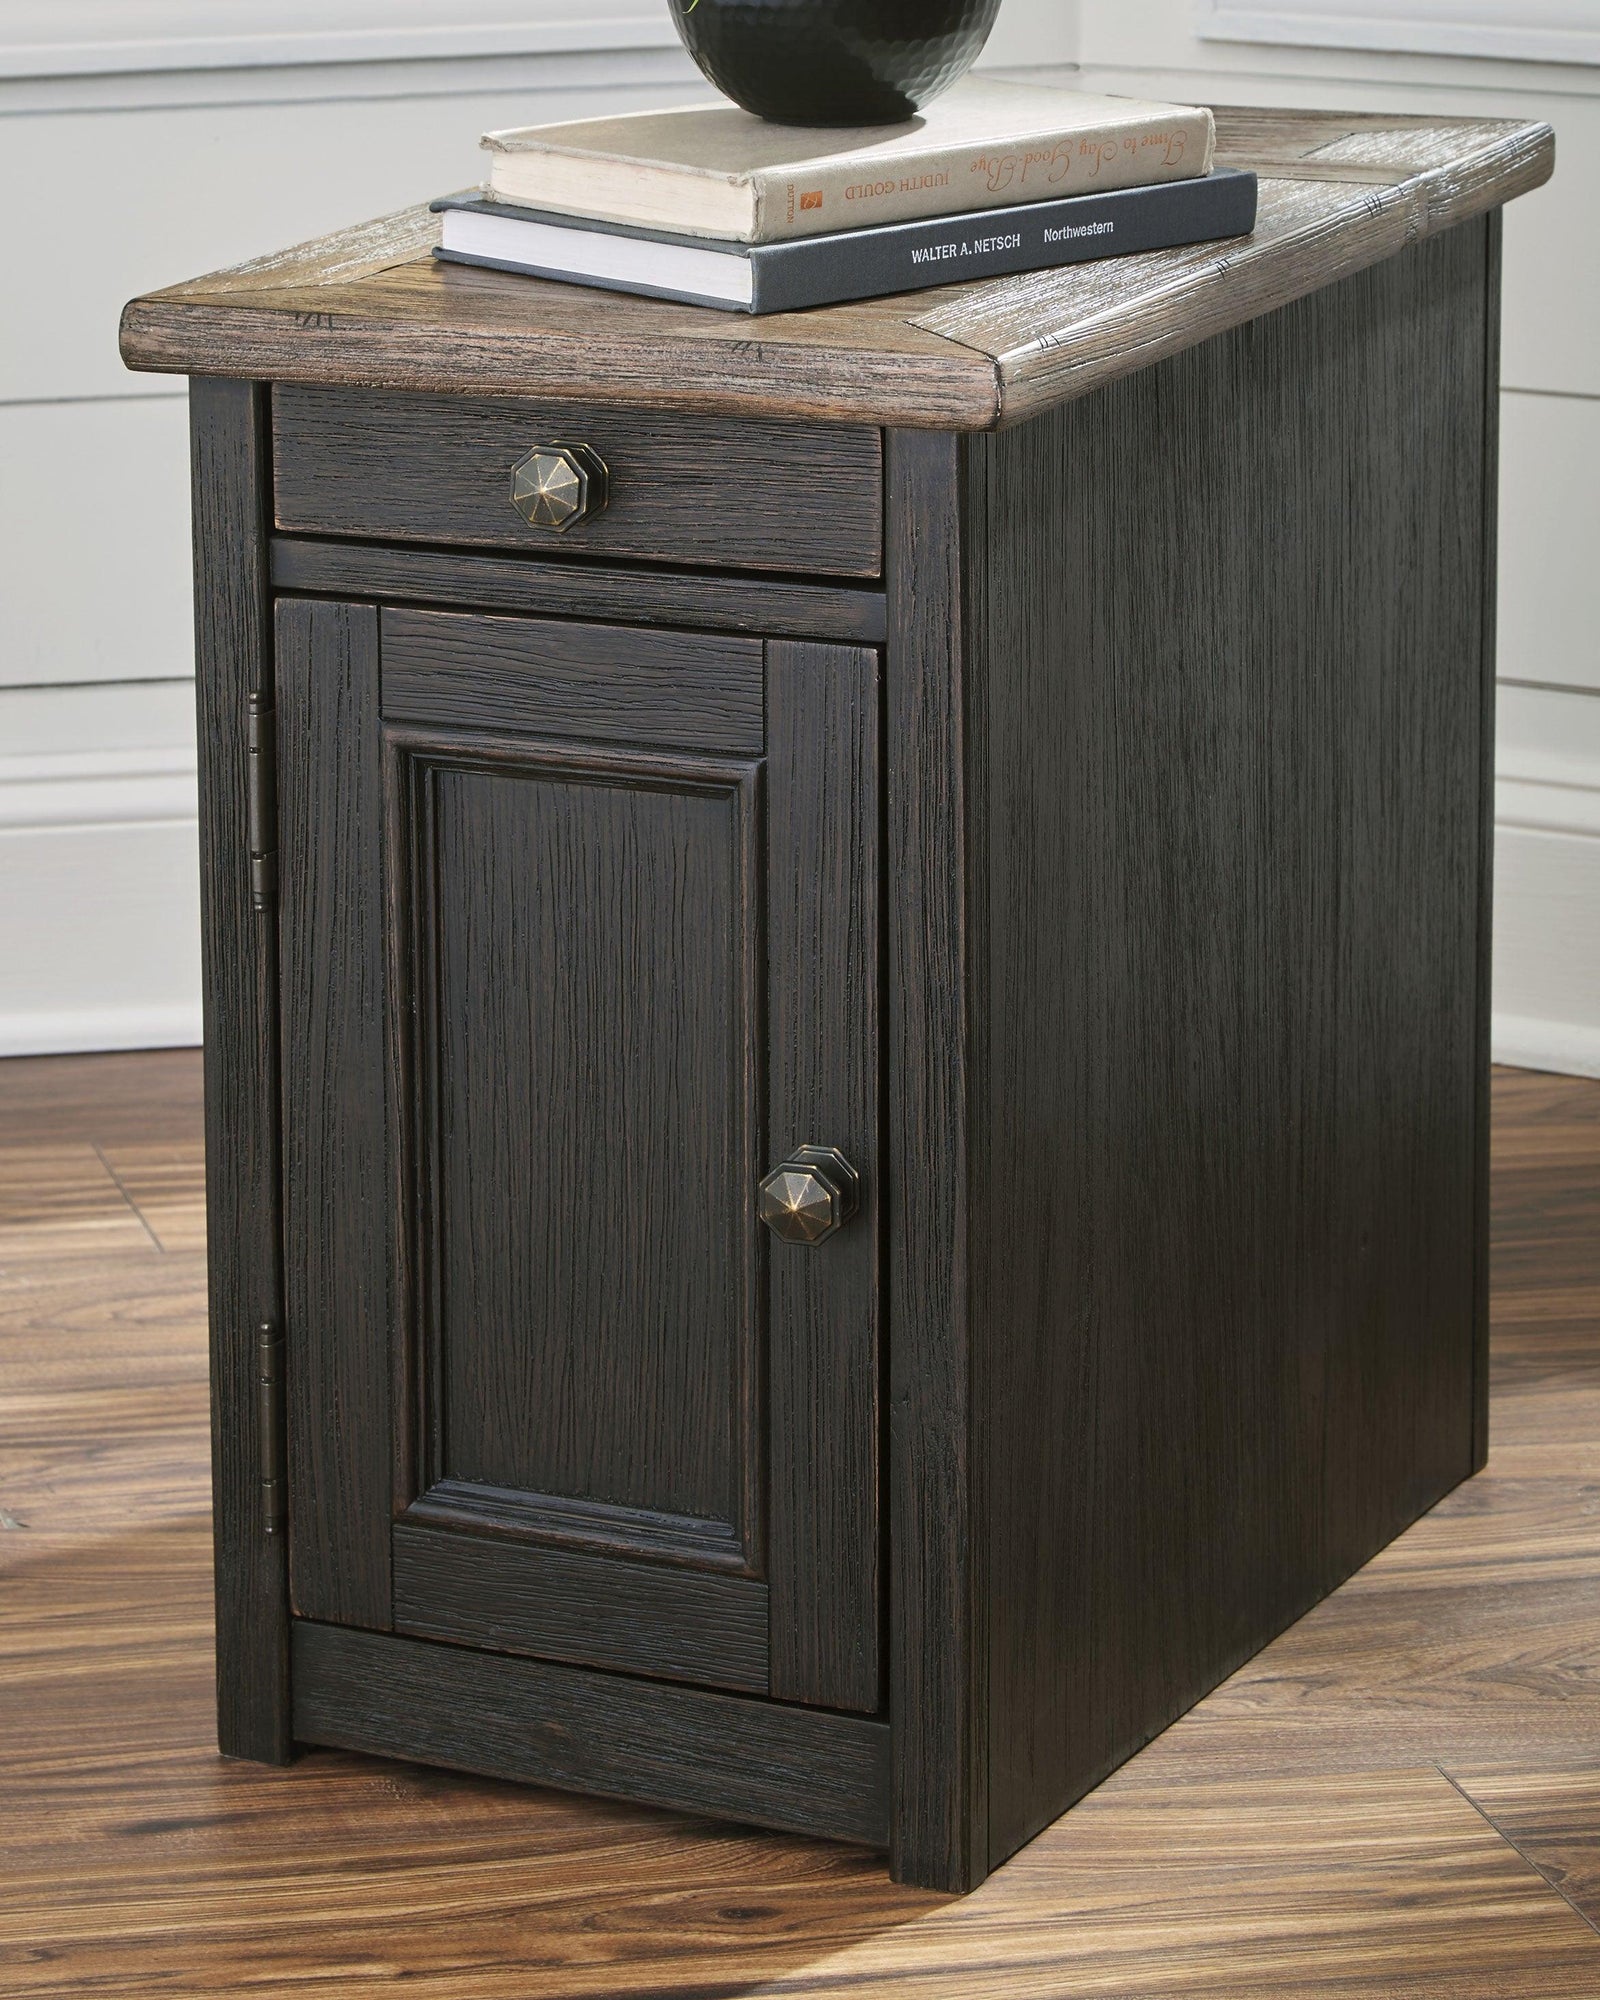 Tyler Creek Grayish Brown/Black Chairside End Table With Usb Ports & Outlets